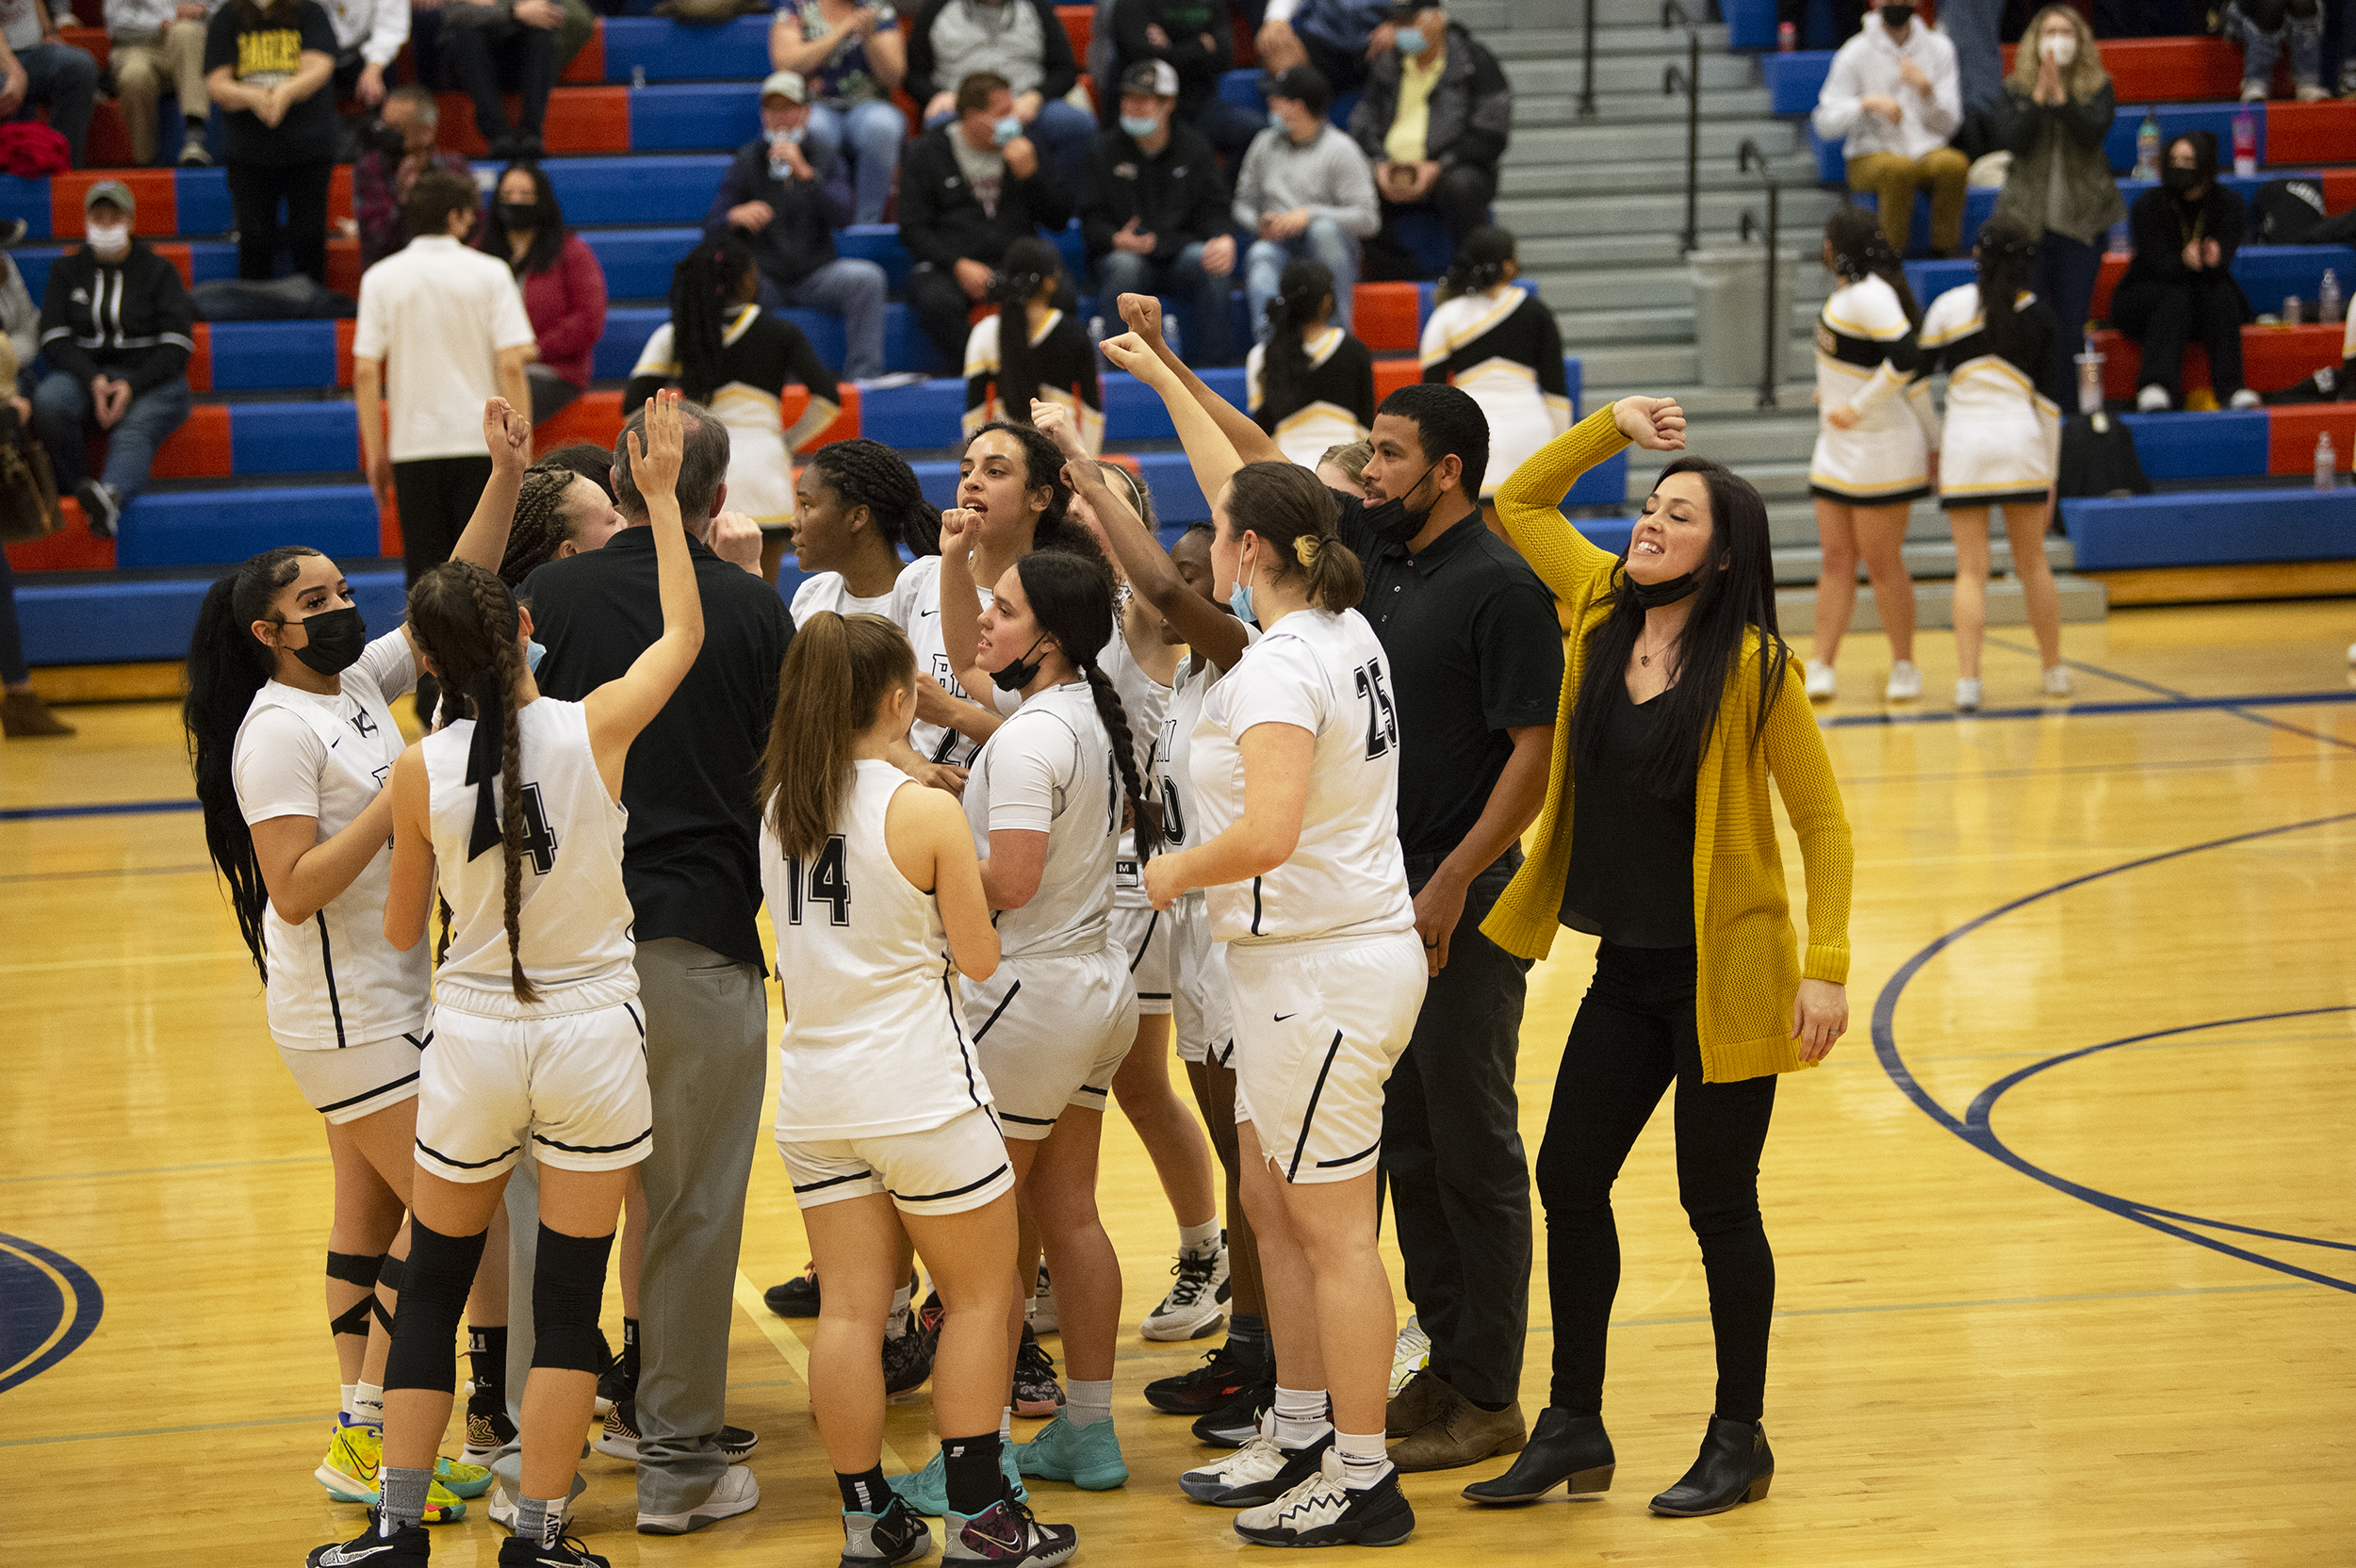 The Hudson's Bay girls basketball team celebrates their 33-30 win over W.F.